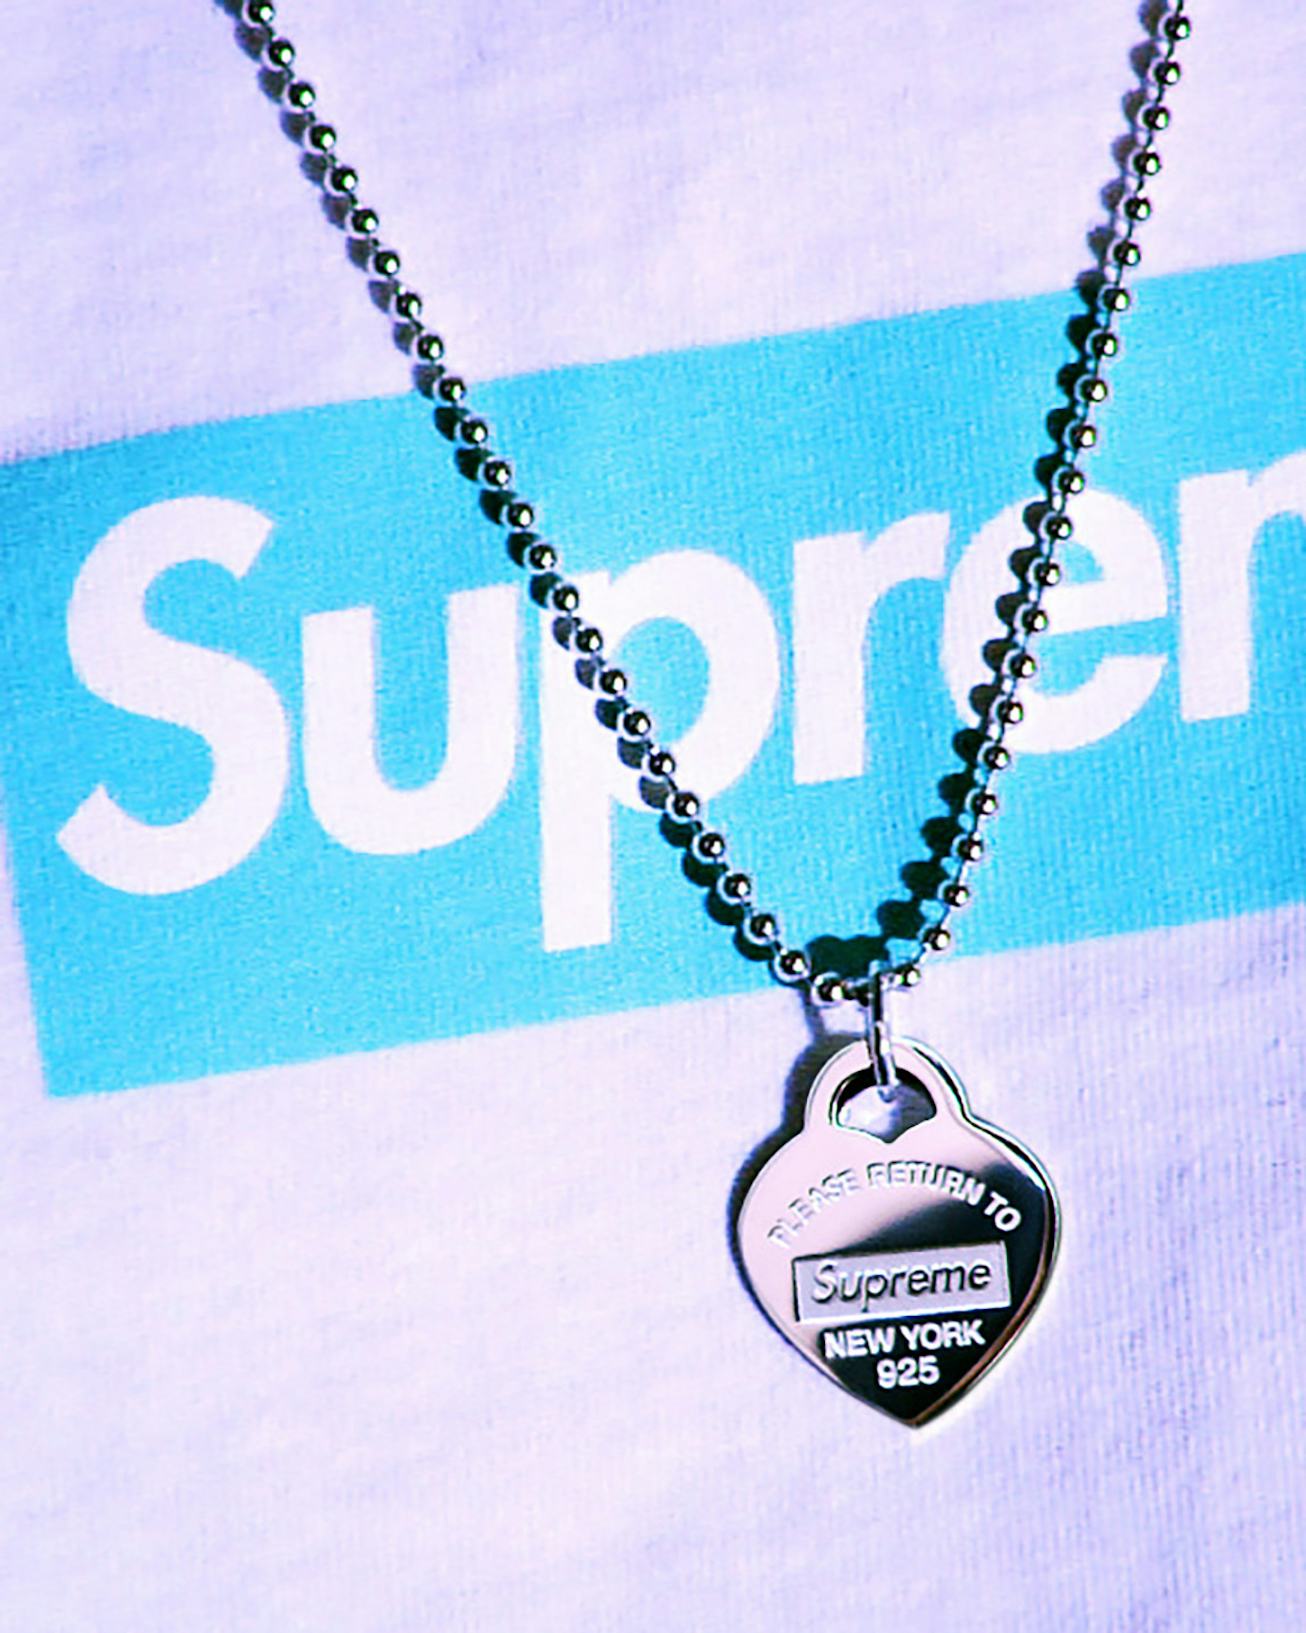 How To Buy Supreme x Tiffany & Co.’s Jewelry Collaboration